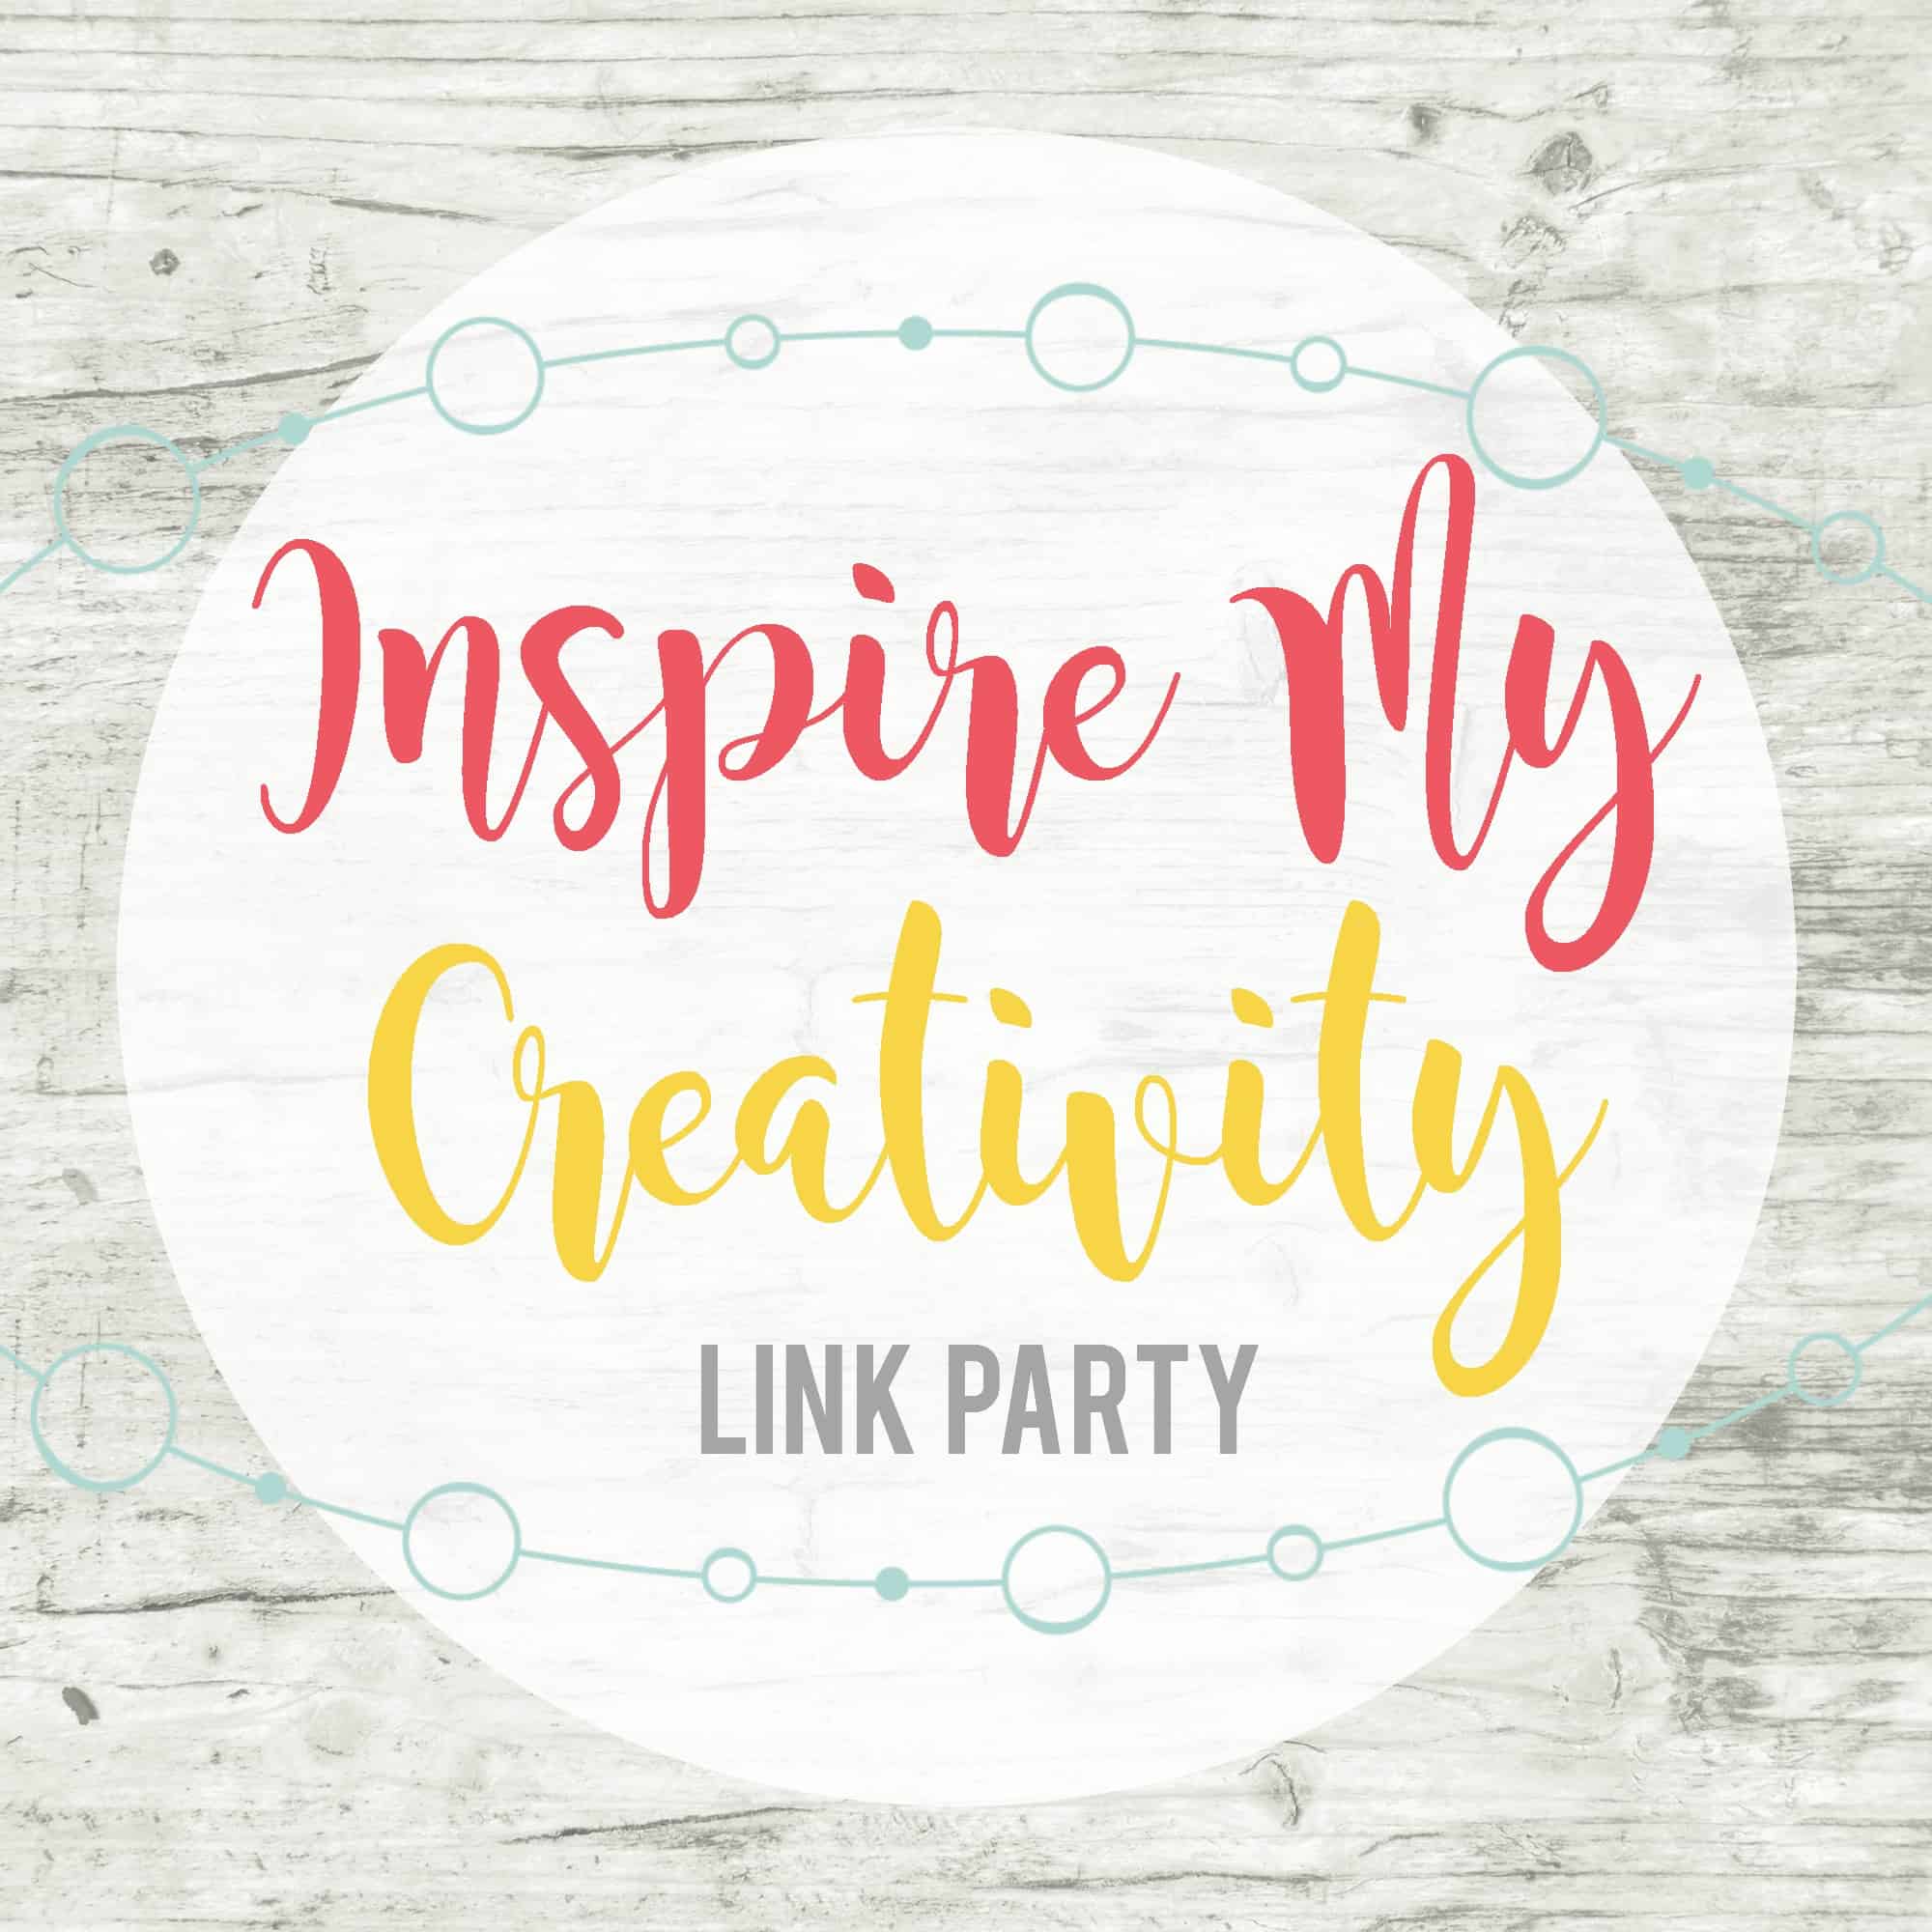 Inspire My Creativity Link Party for thrift store makeovers.